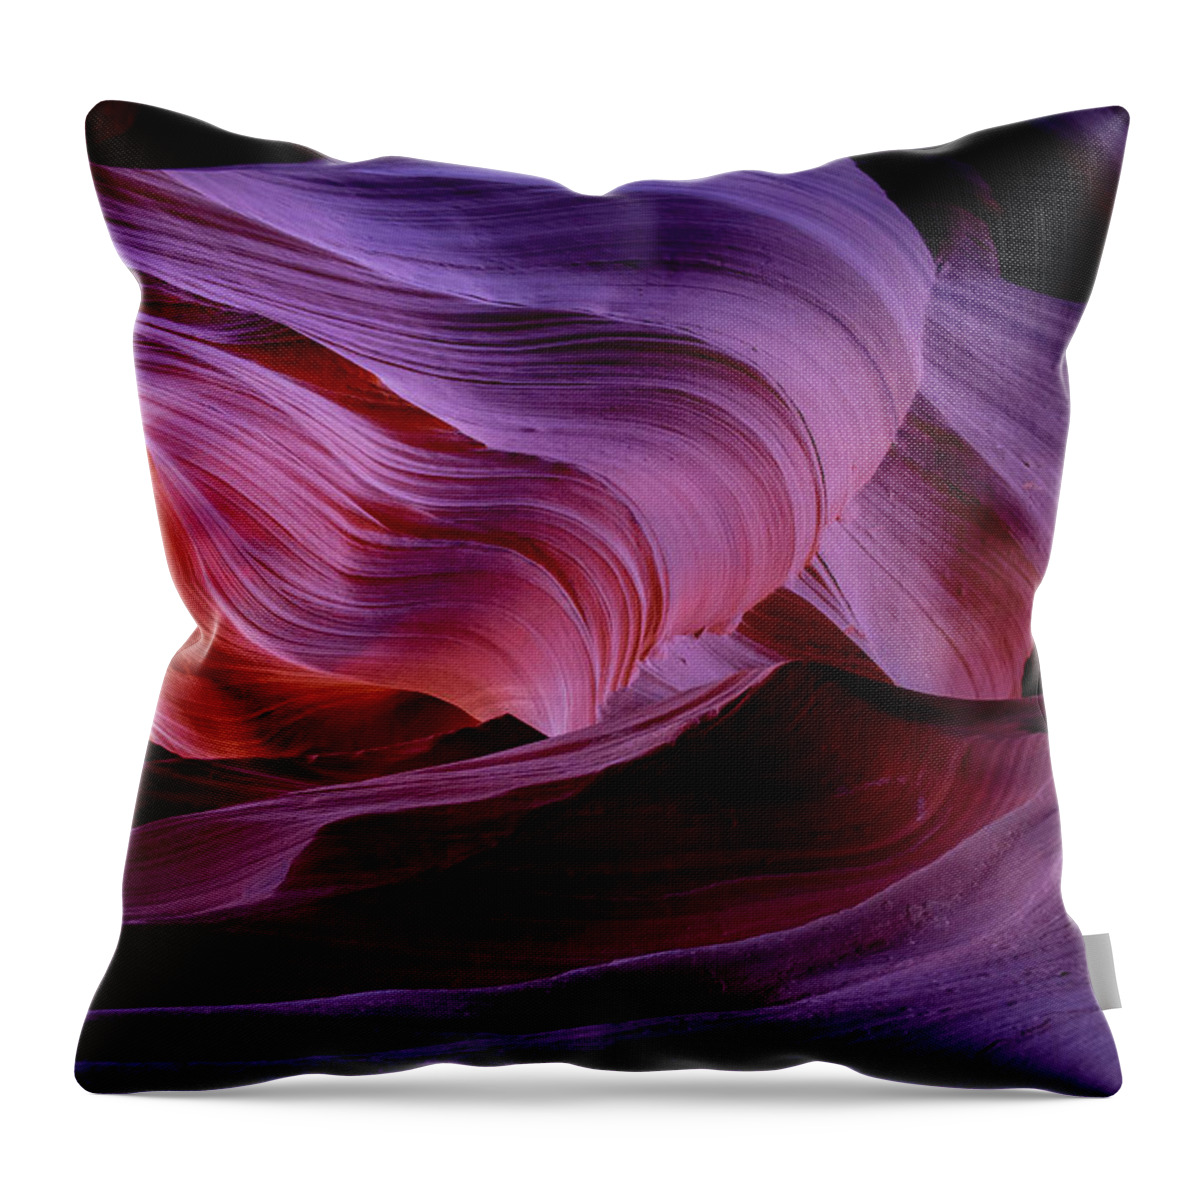 Artistic Throw Pillow featuring the photograph The Earth's Body 8 by Mache Del Campo